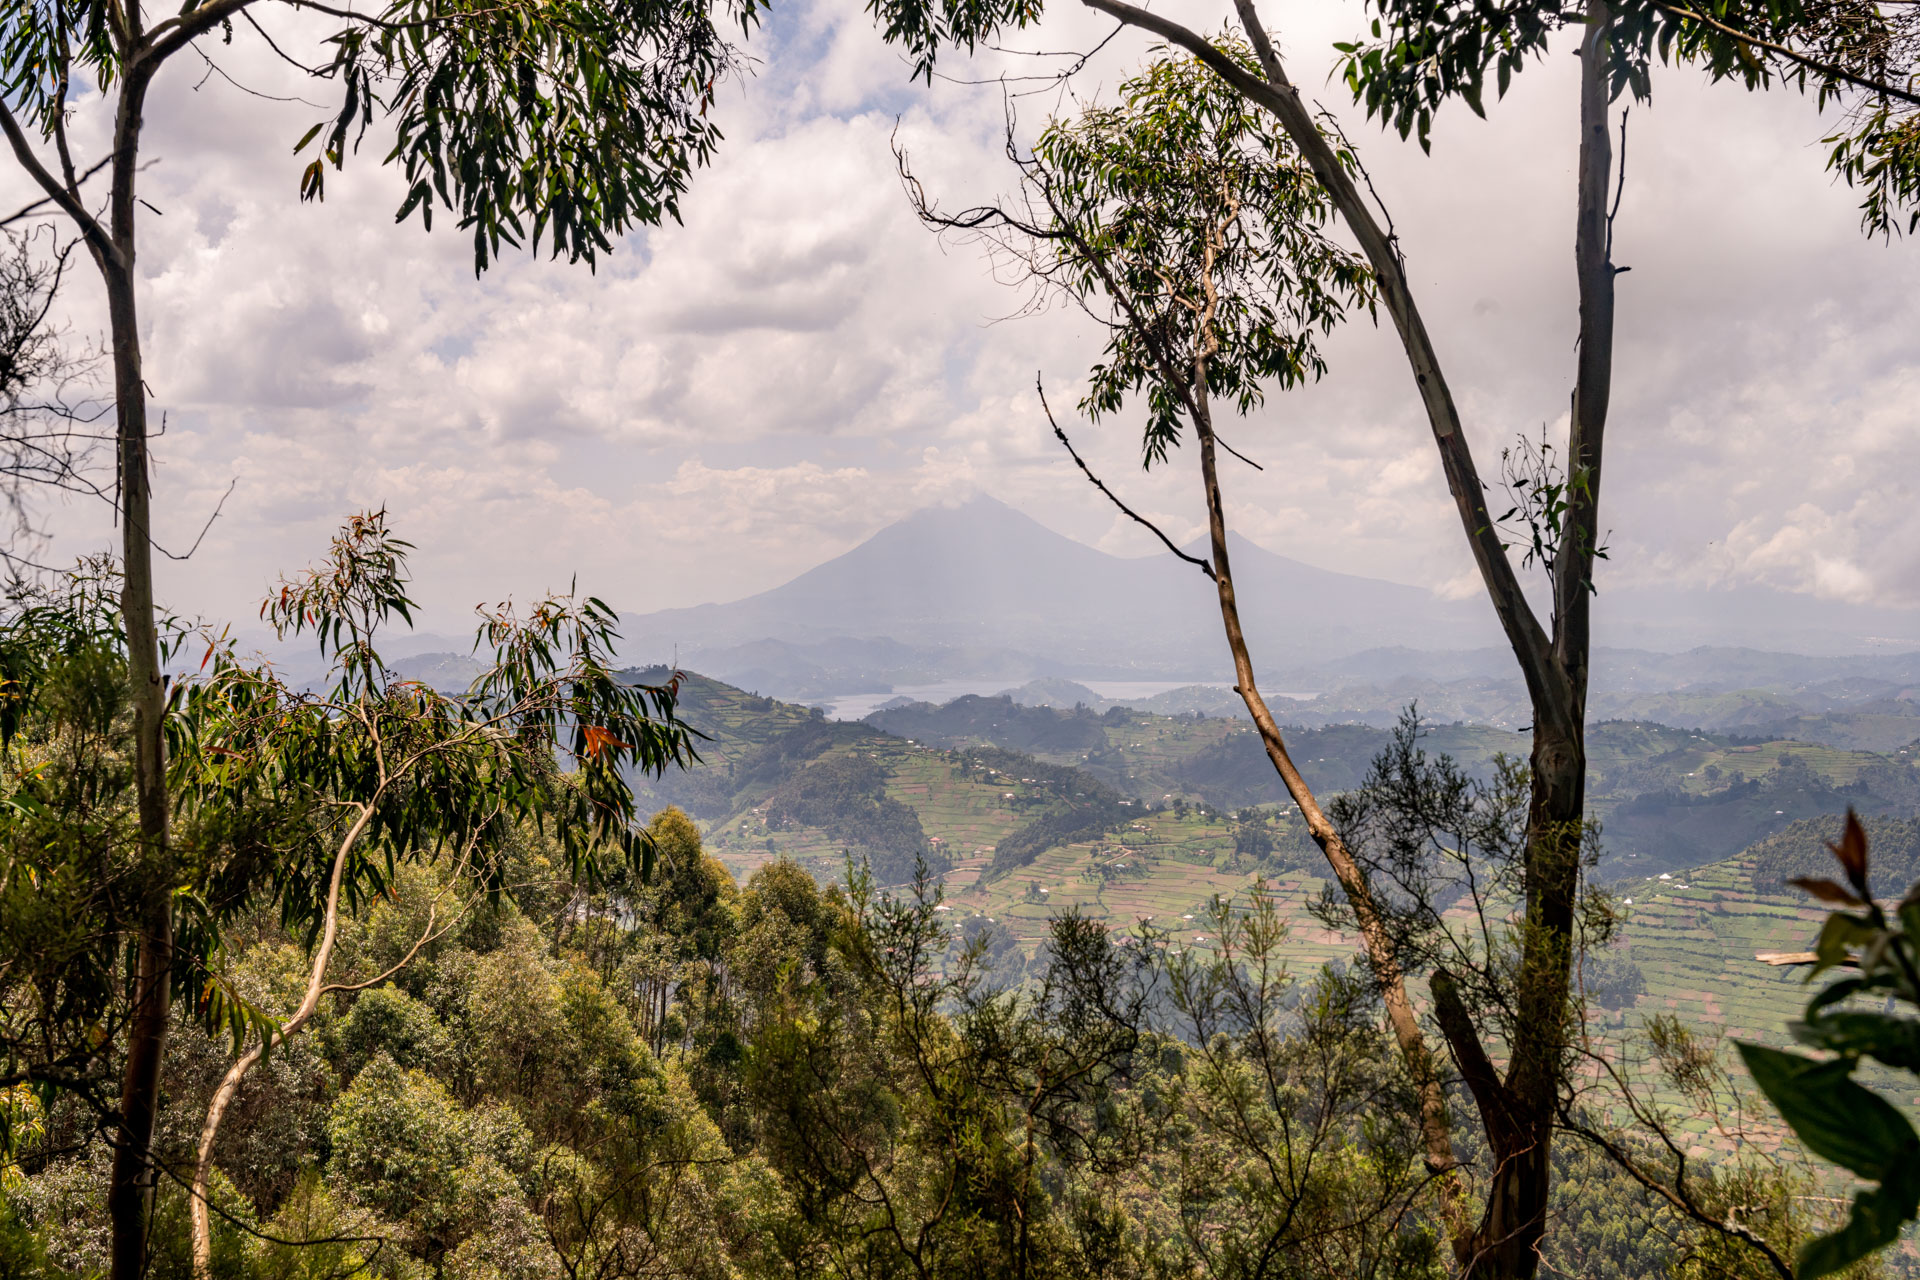 The incredible view from Bwindi, with Lake Mutanda and Virunga volcanoes in the distance